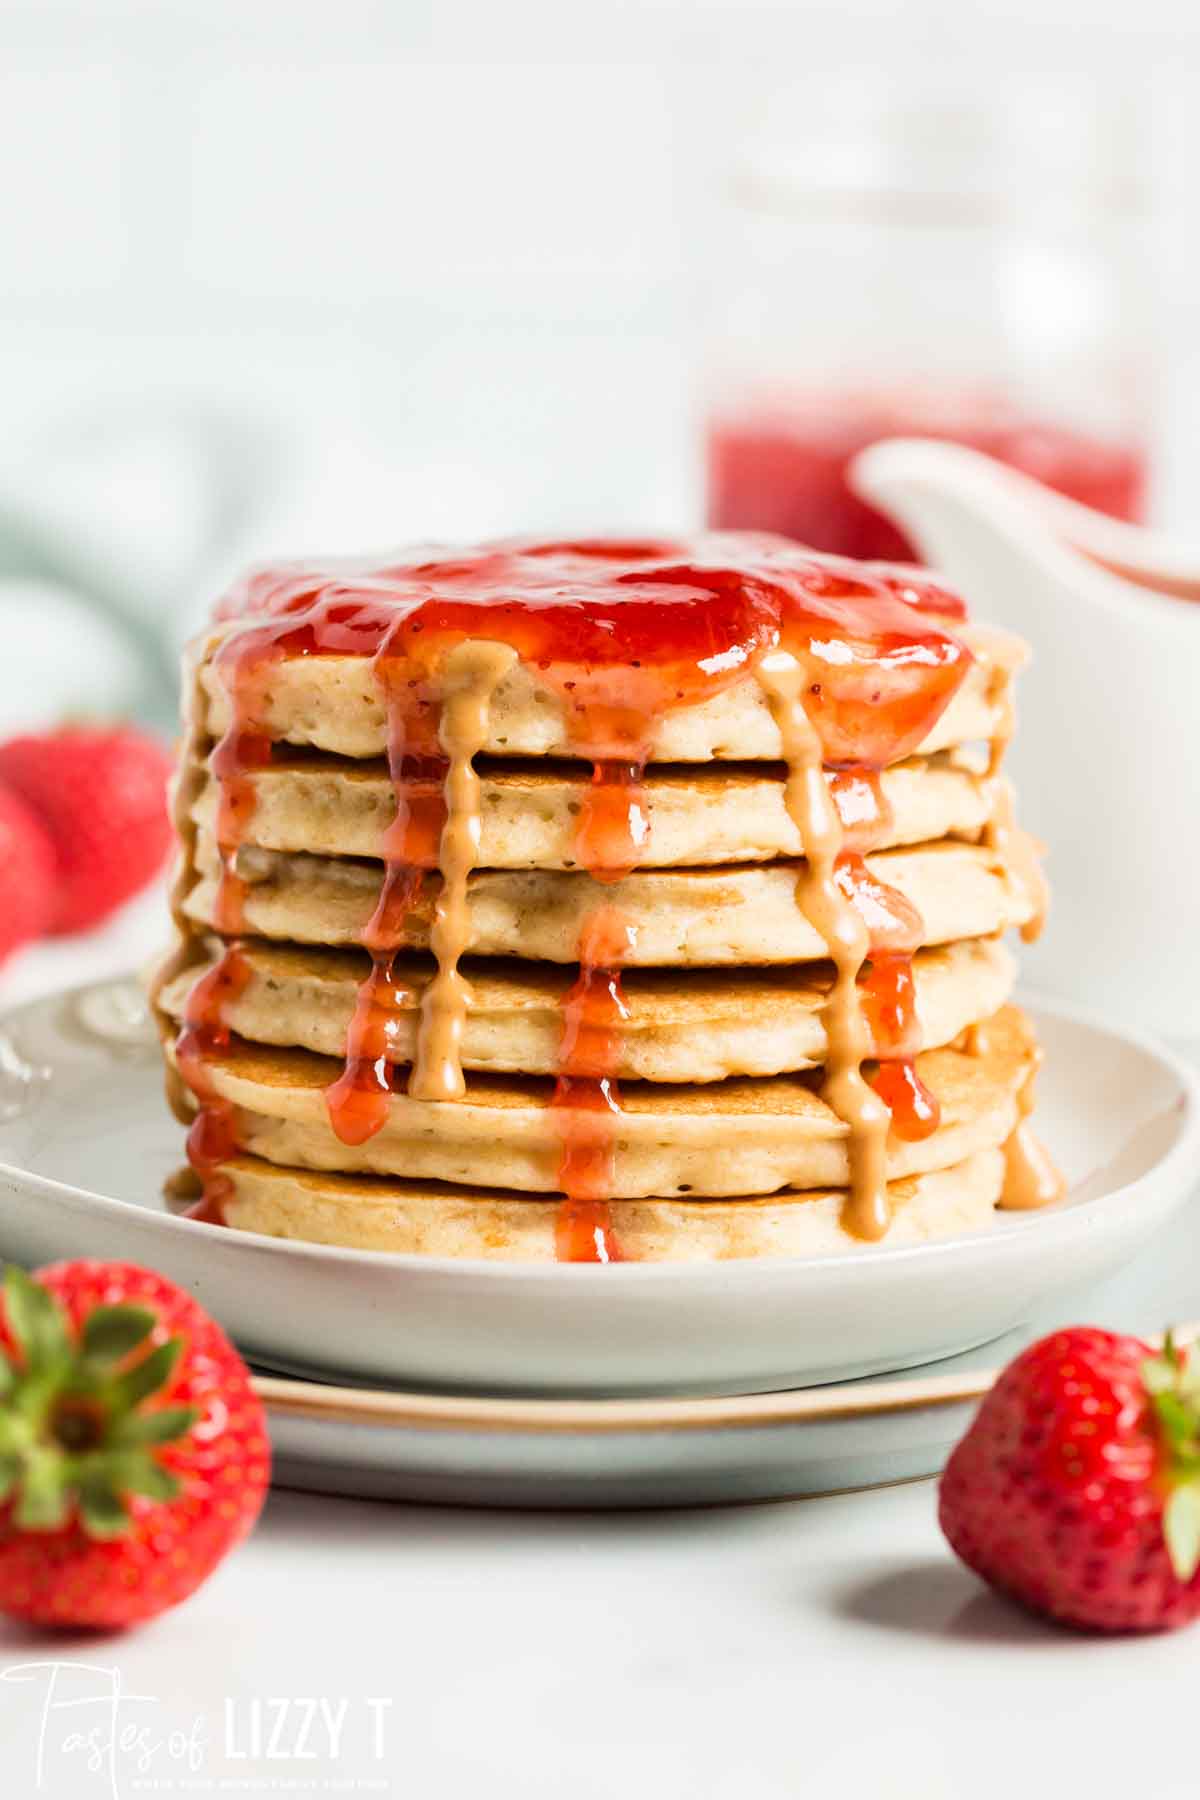 Fluffy Peanut Butter and Jelly Pancakes | Tastes of Lizzy T